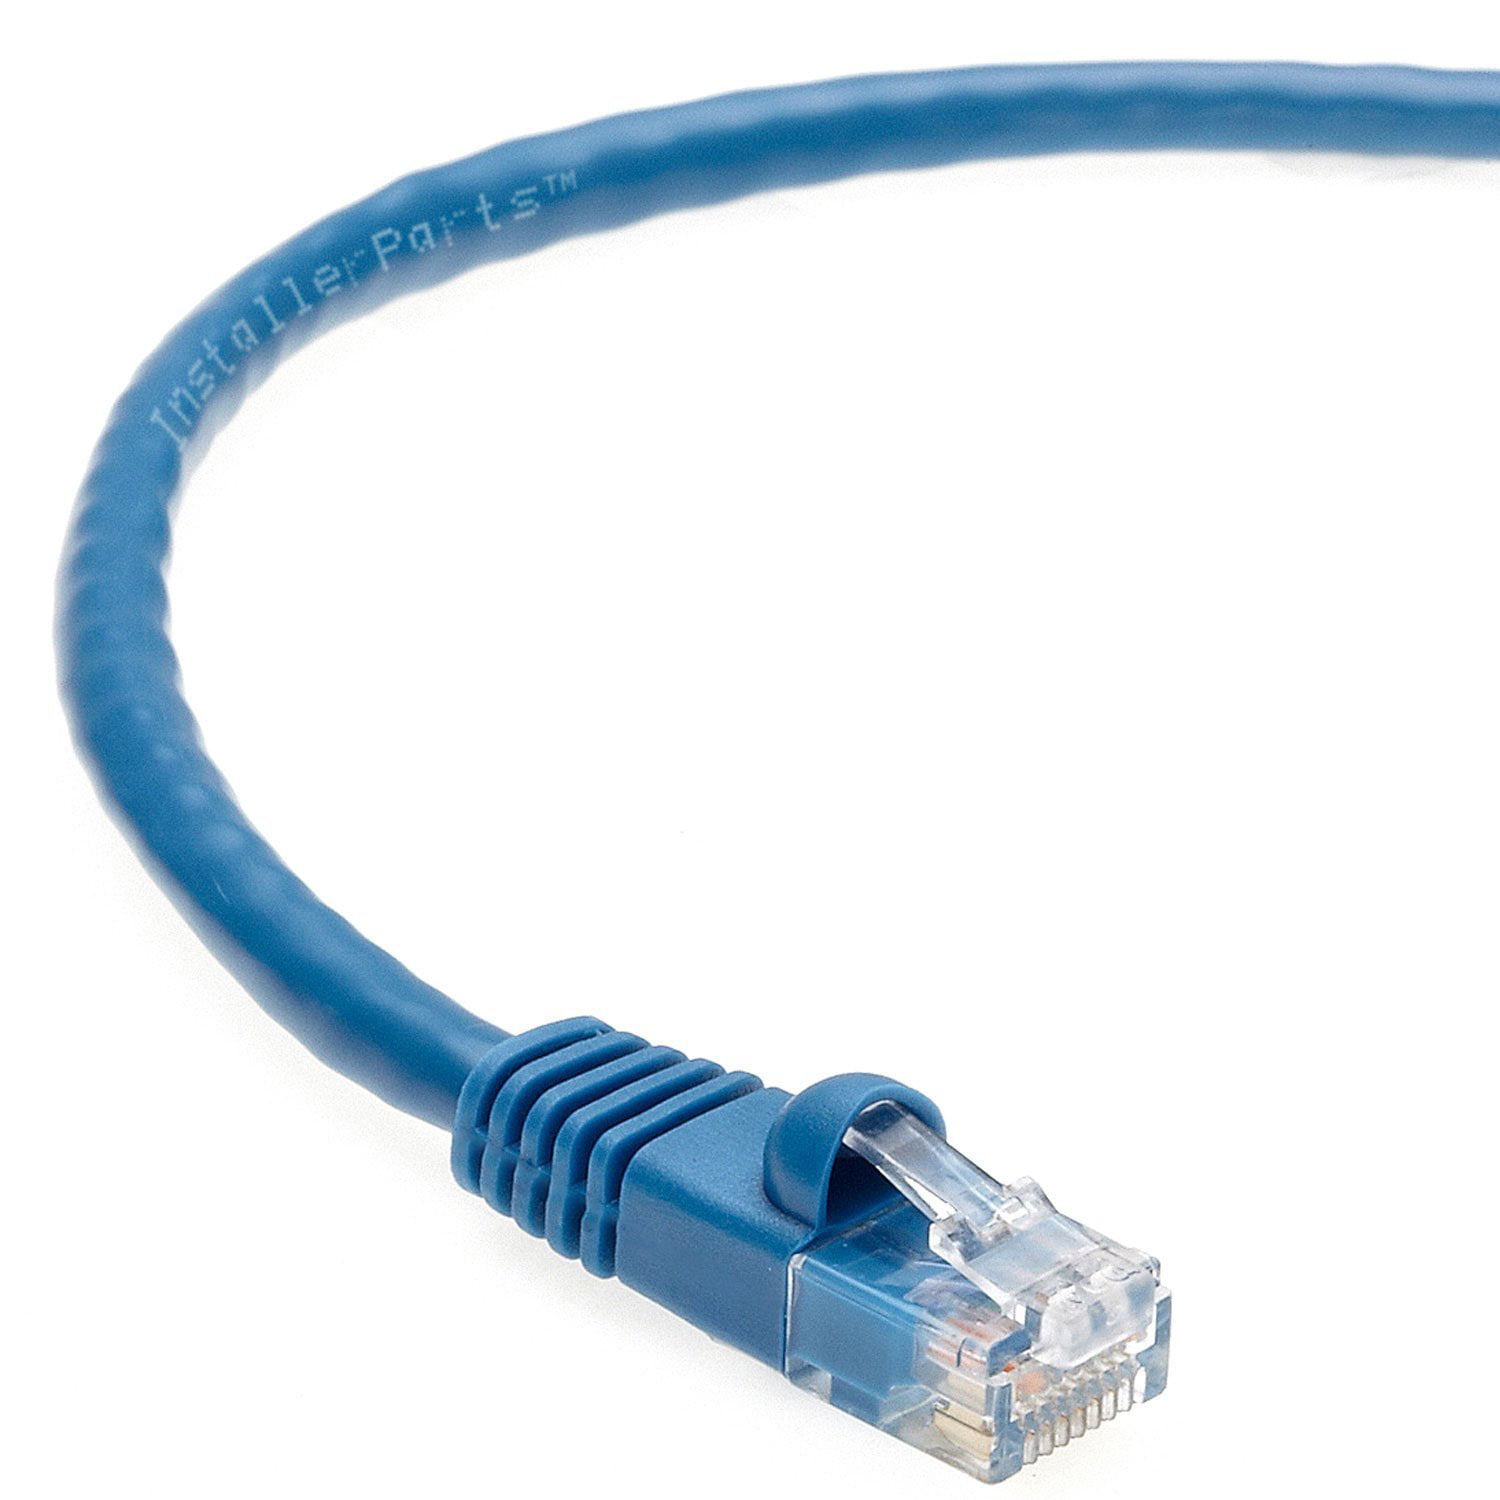 InstallerParts Blue Ethernet Cable CAT5E Cable UTP Booted 2 FT Professional Series 1Gigabit/Sec Network/Internet Cable 350MHZ 10 Pack 